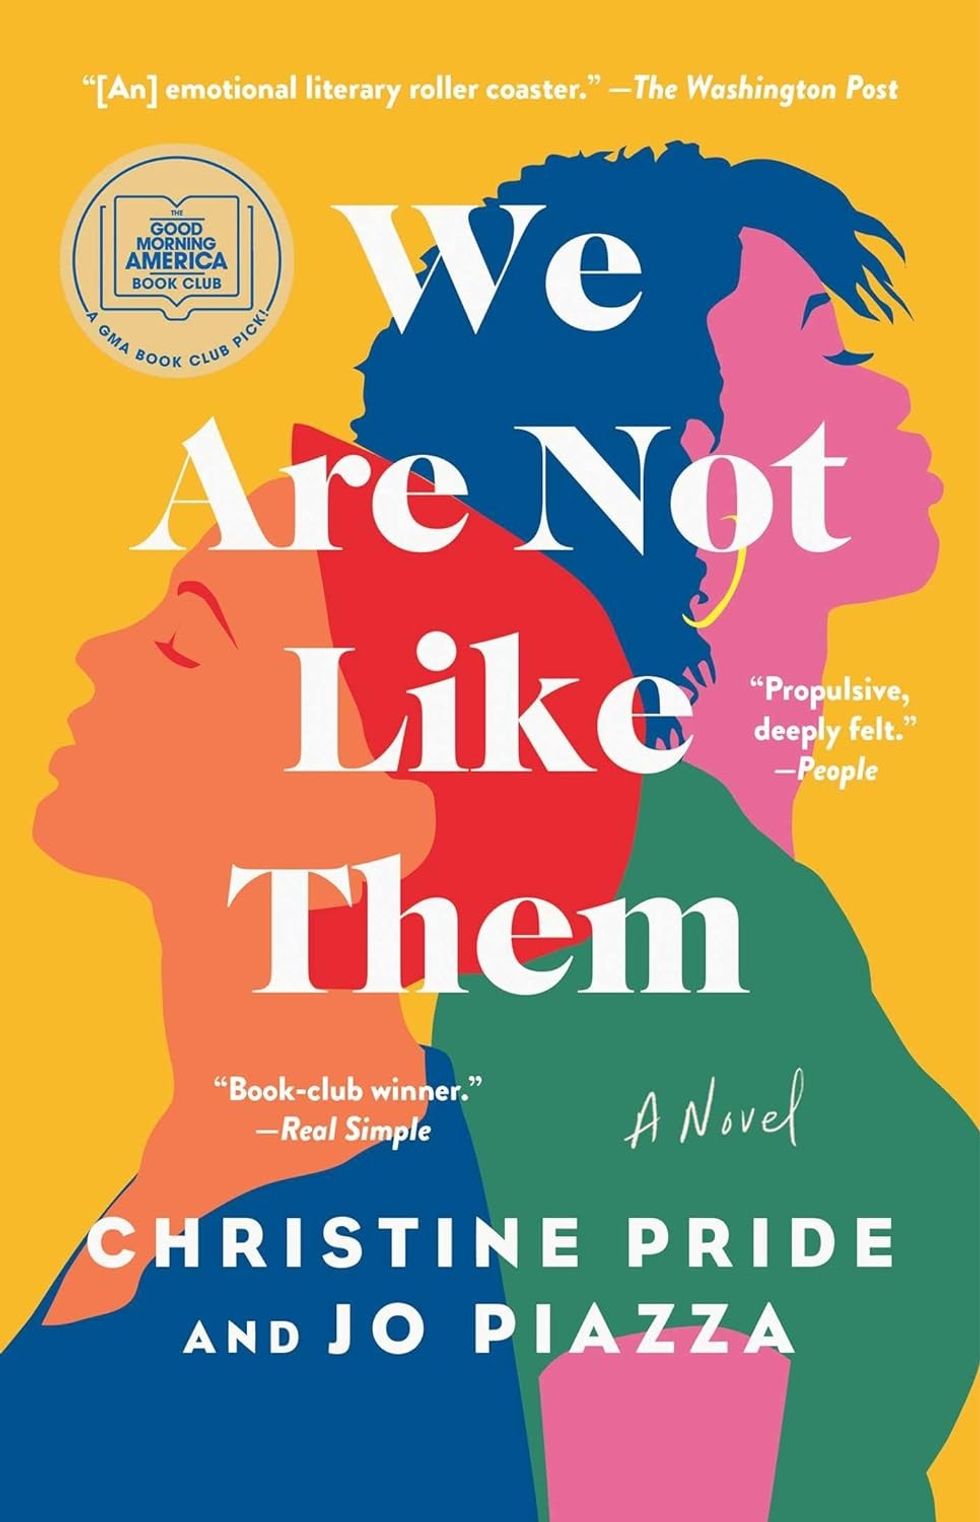 "We Are Not Like Them" by Christine Pride and Jo Piazza